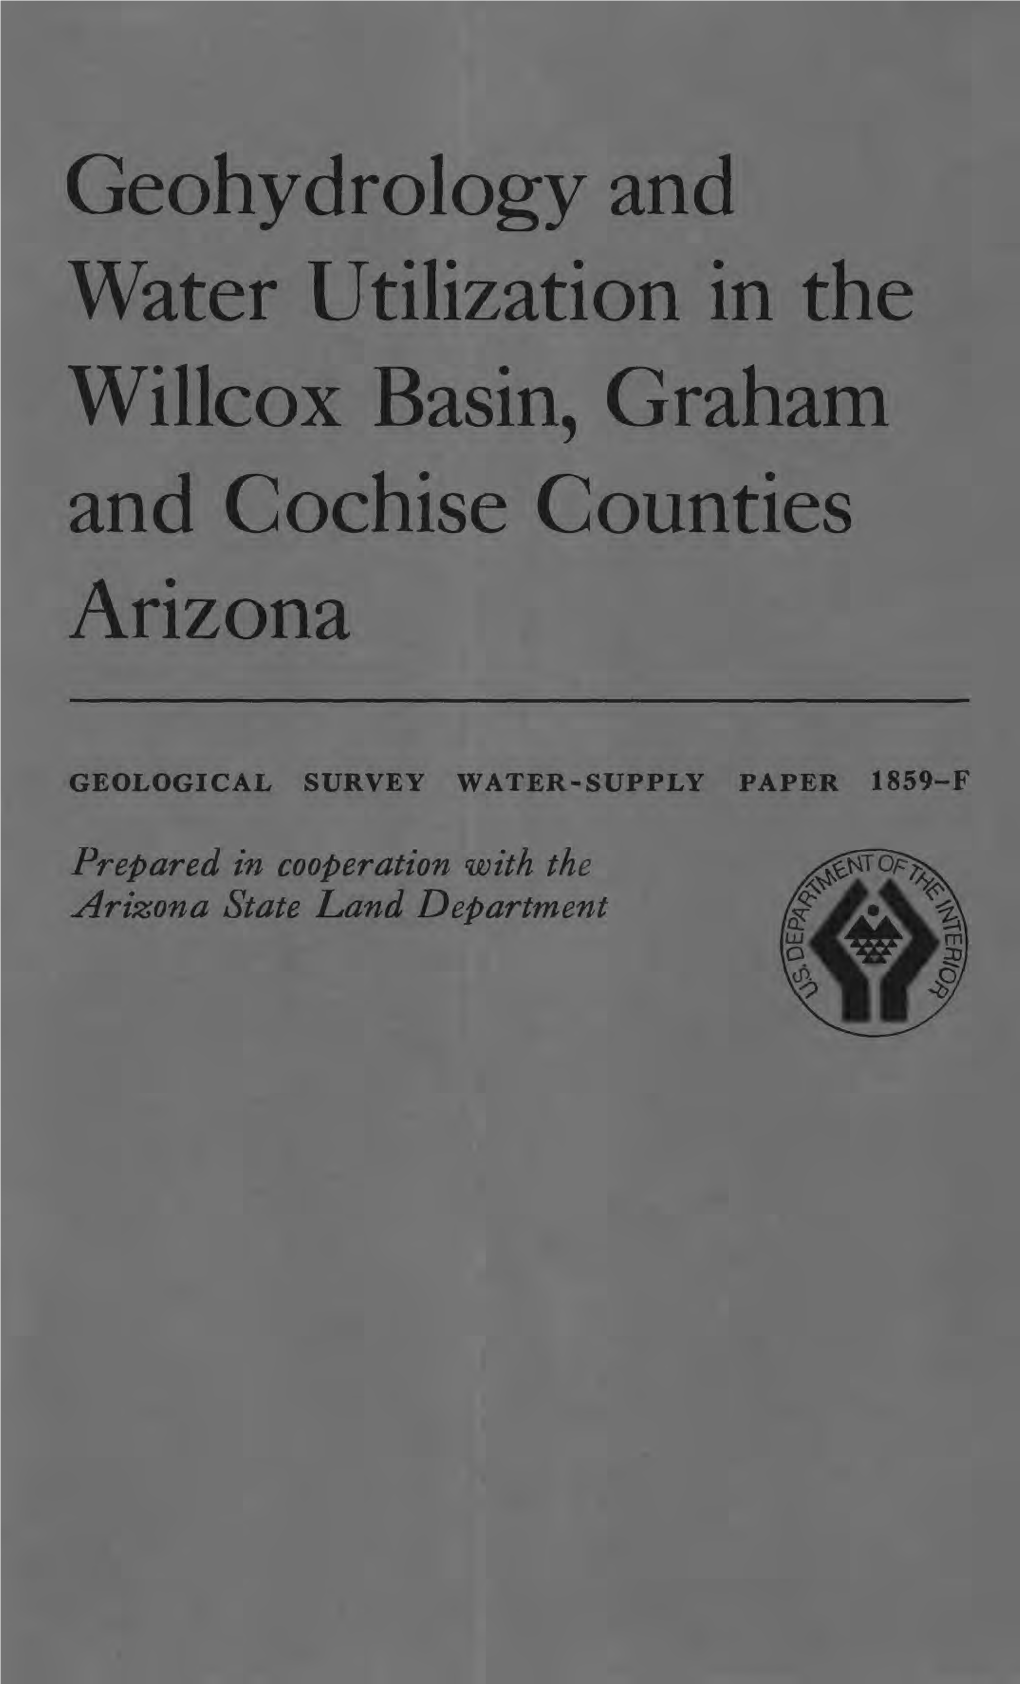 Geohydrology and Water Utilization in the Willcox Basin, Graham and Cochise Counties Arizona